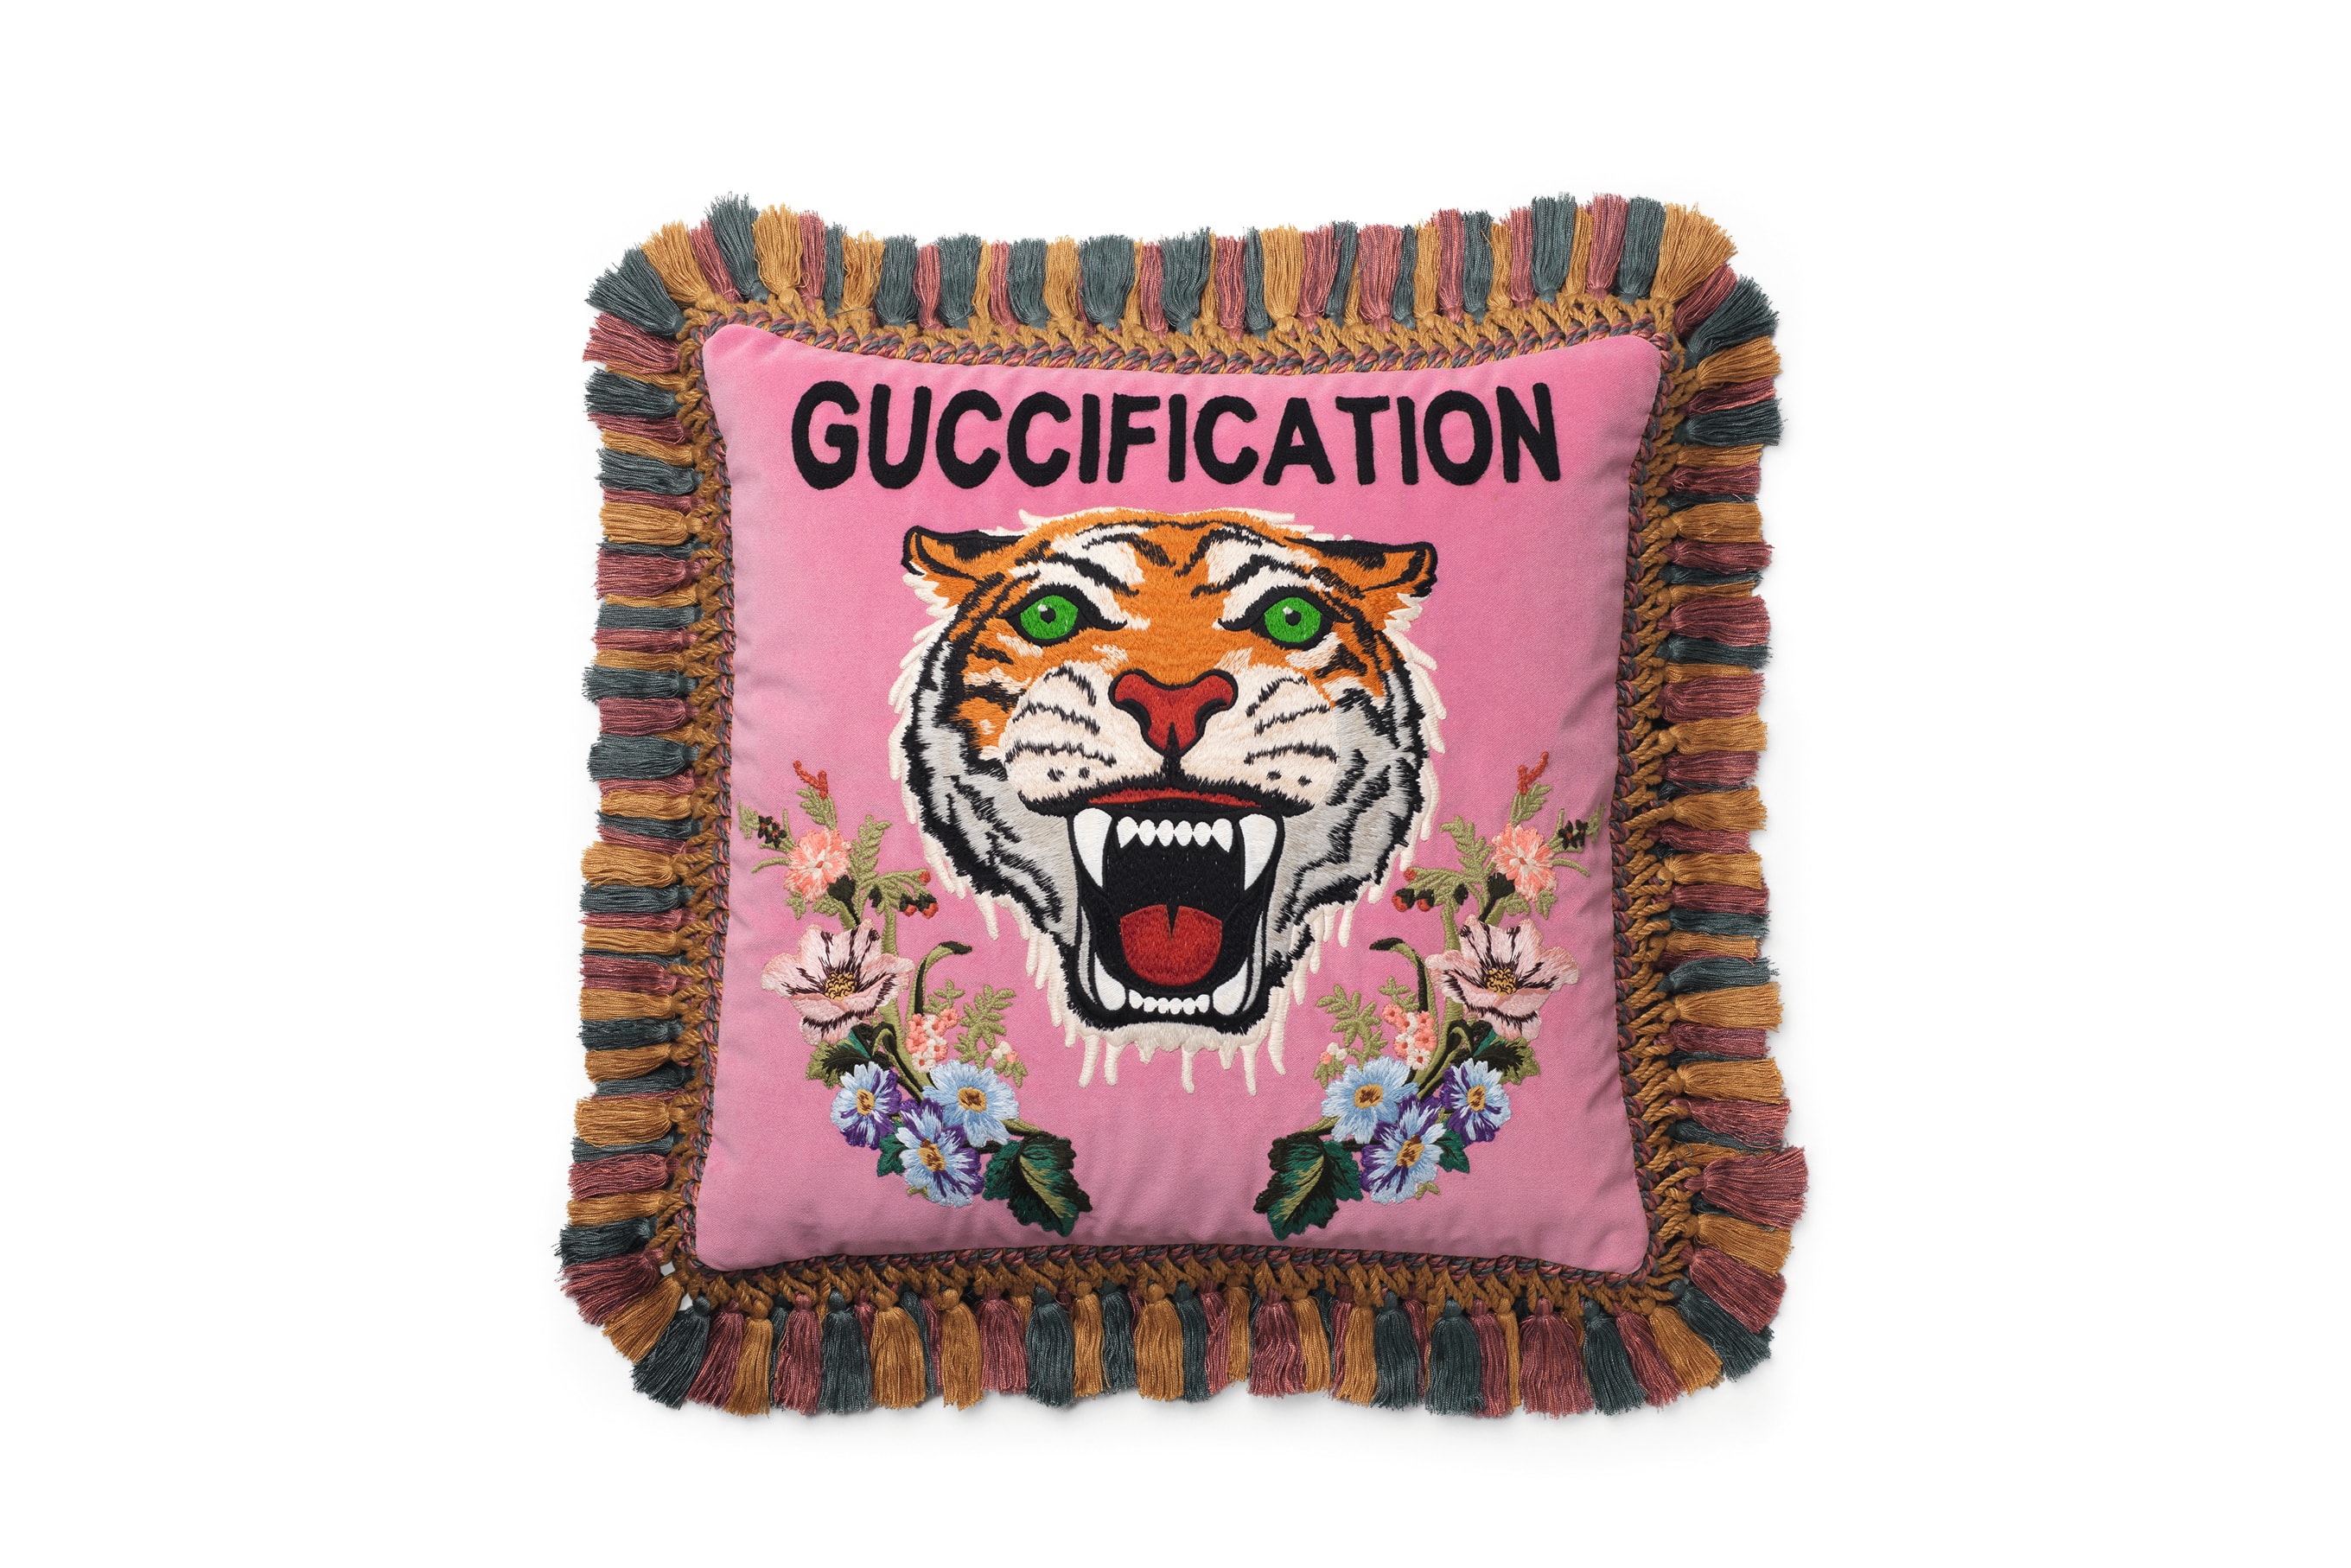 Gucci Decor Collection Candles Chair Stool Pillow Monogram Plates Porcelain Cups Alessandro Michele